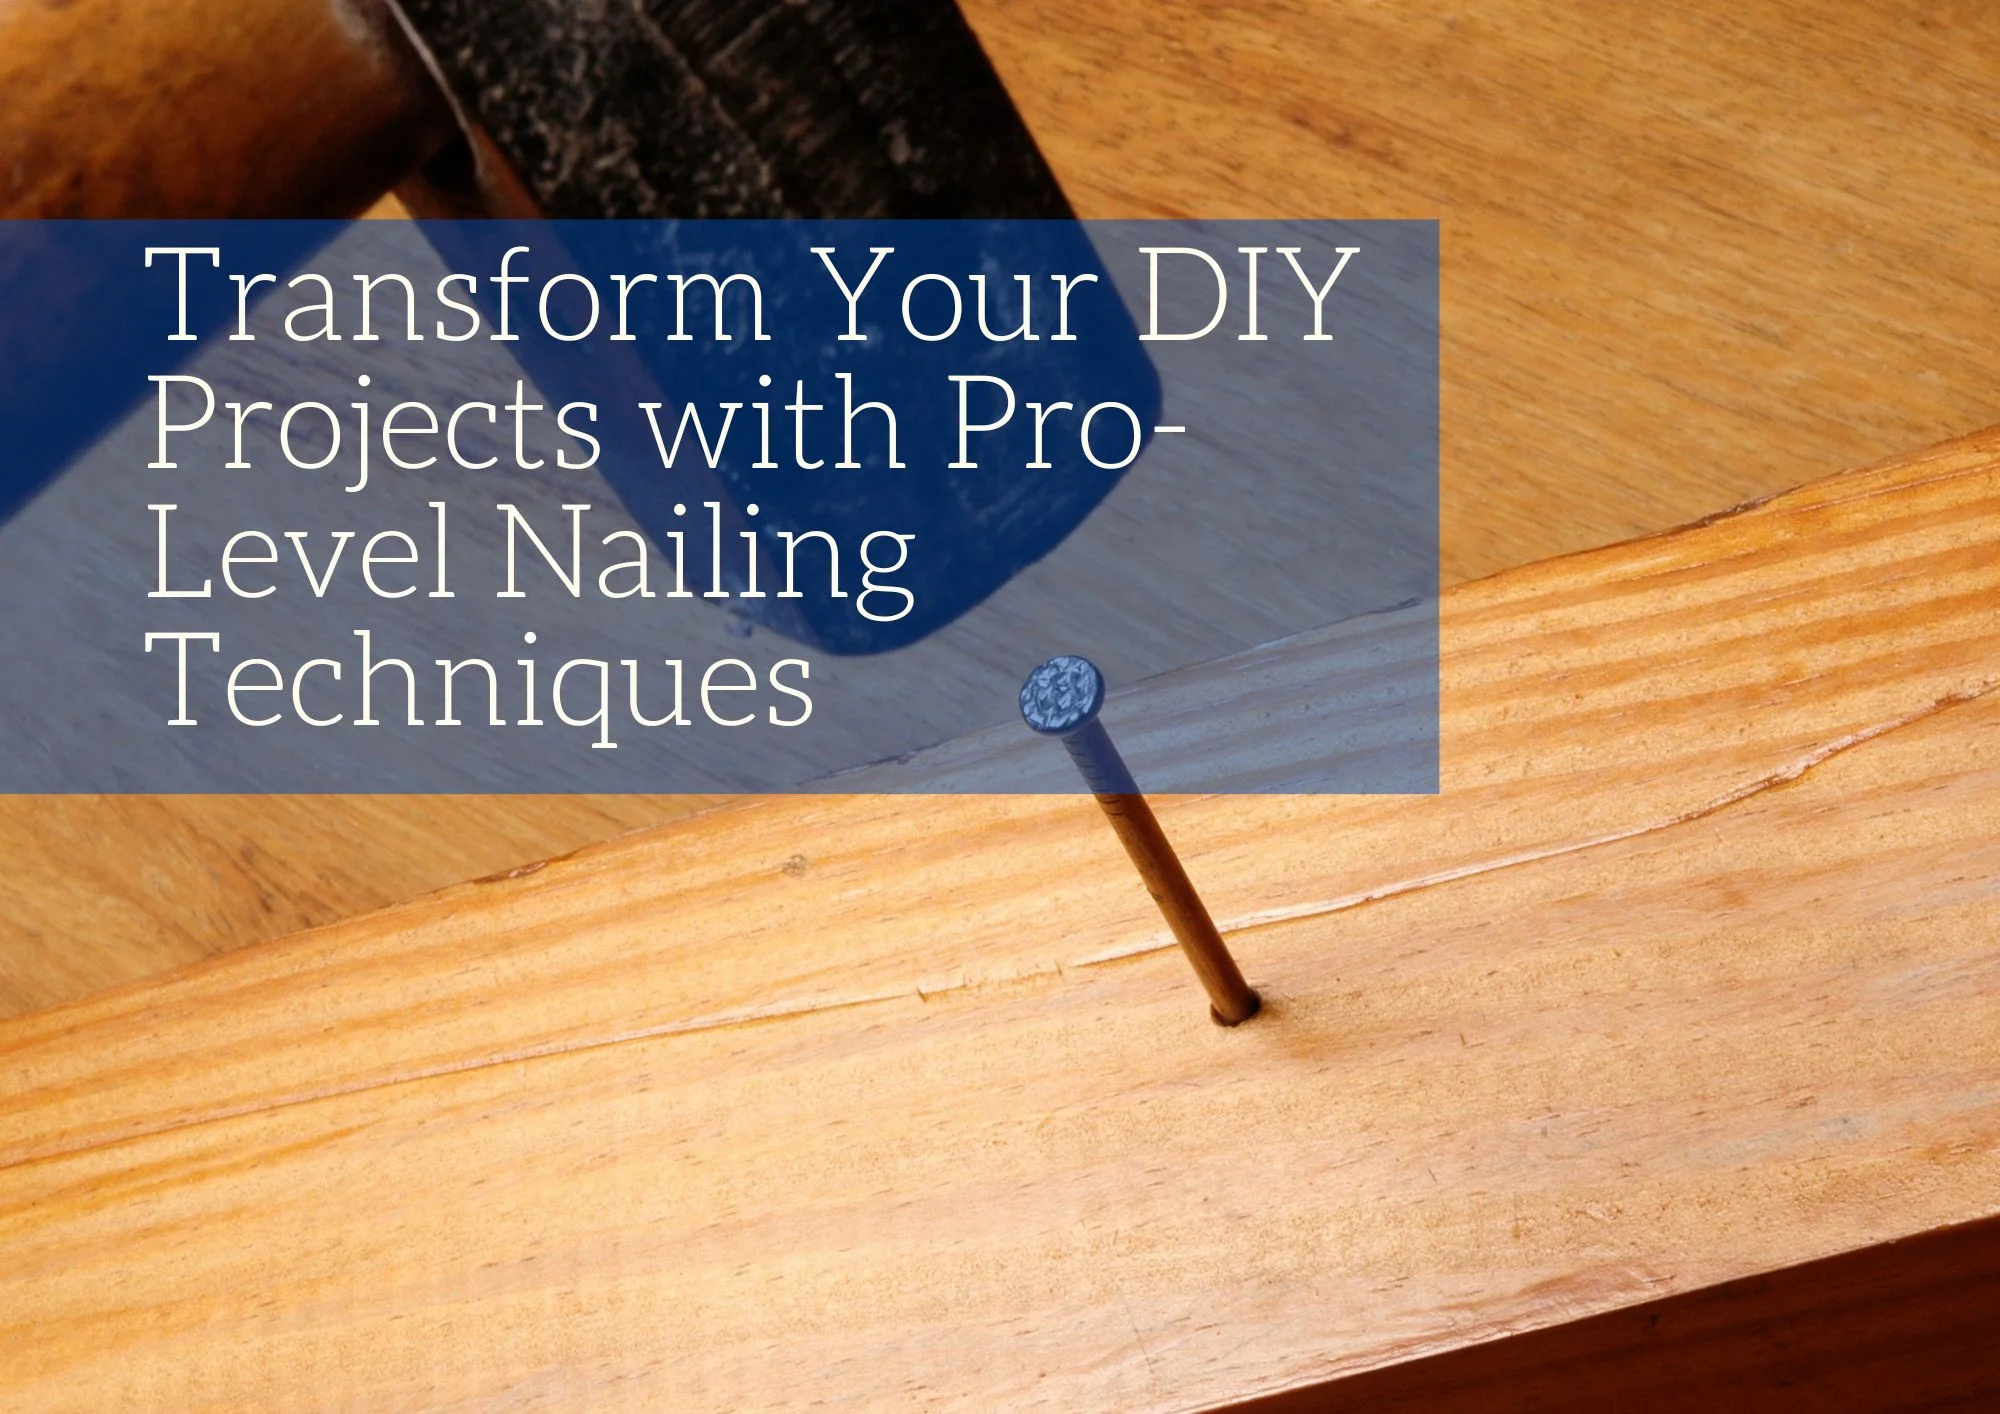 Transform Your DIY Projects with Pro-Level Nailing Techniques